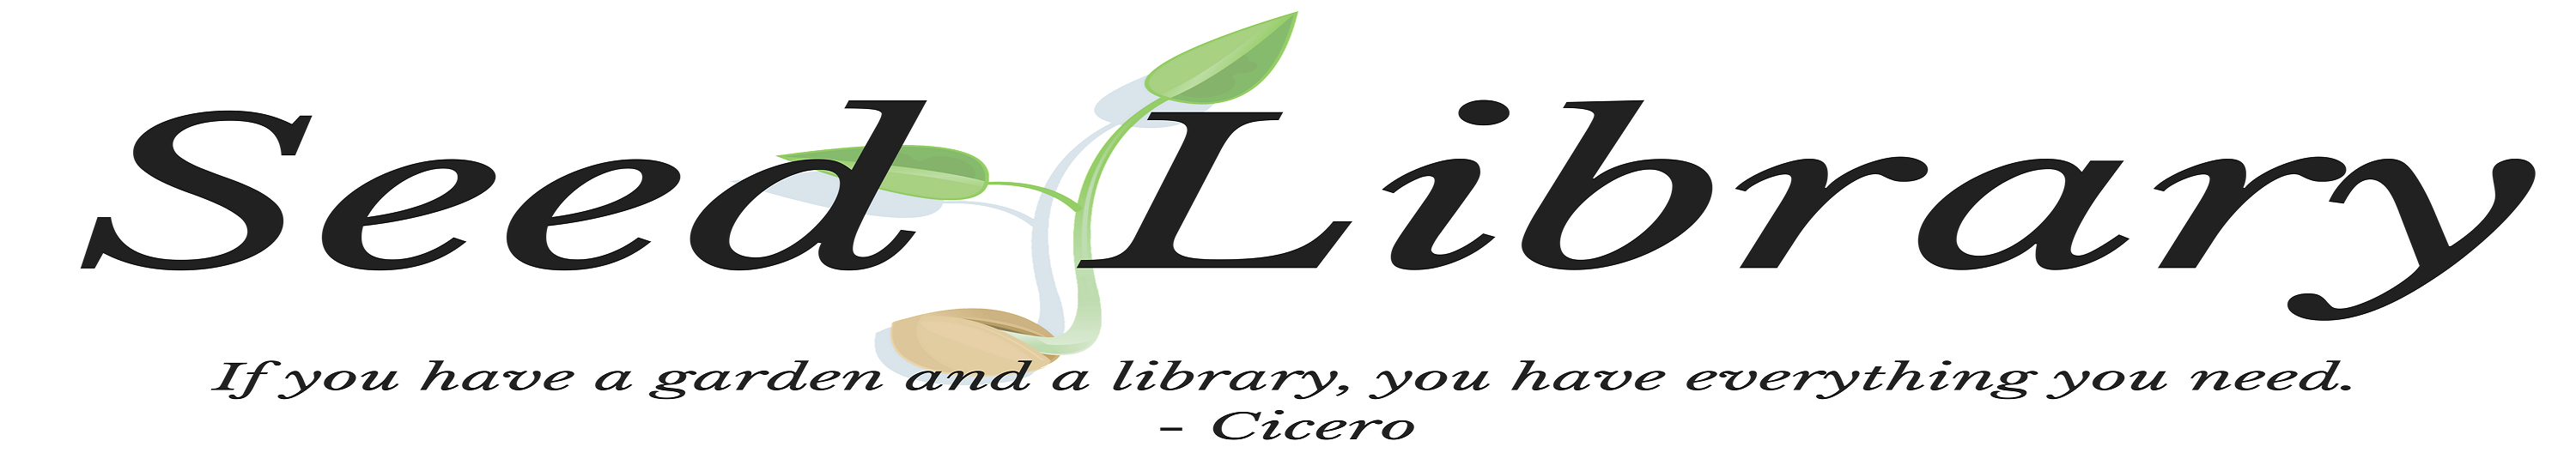 seed Library banner